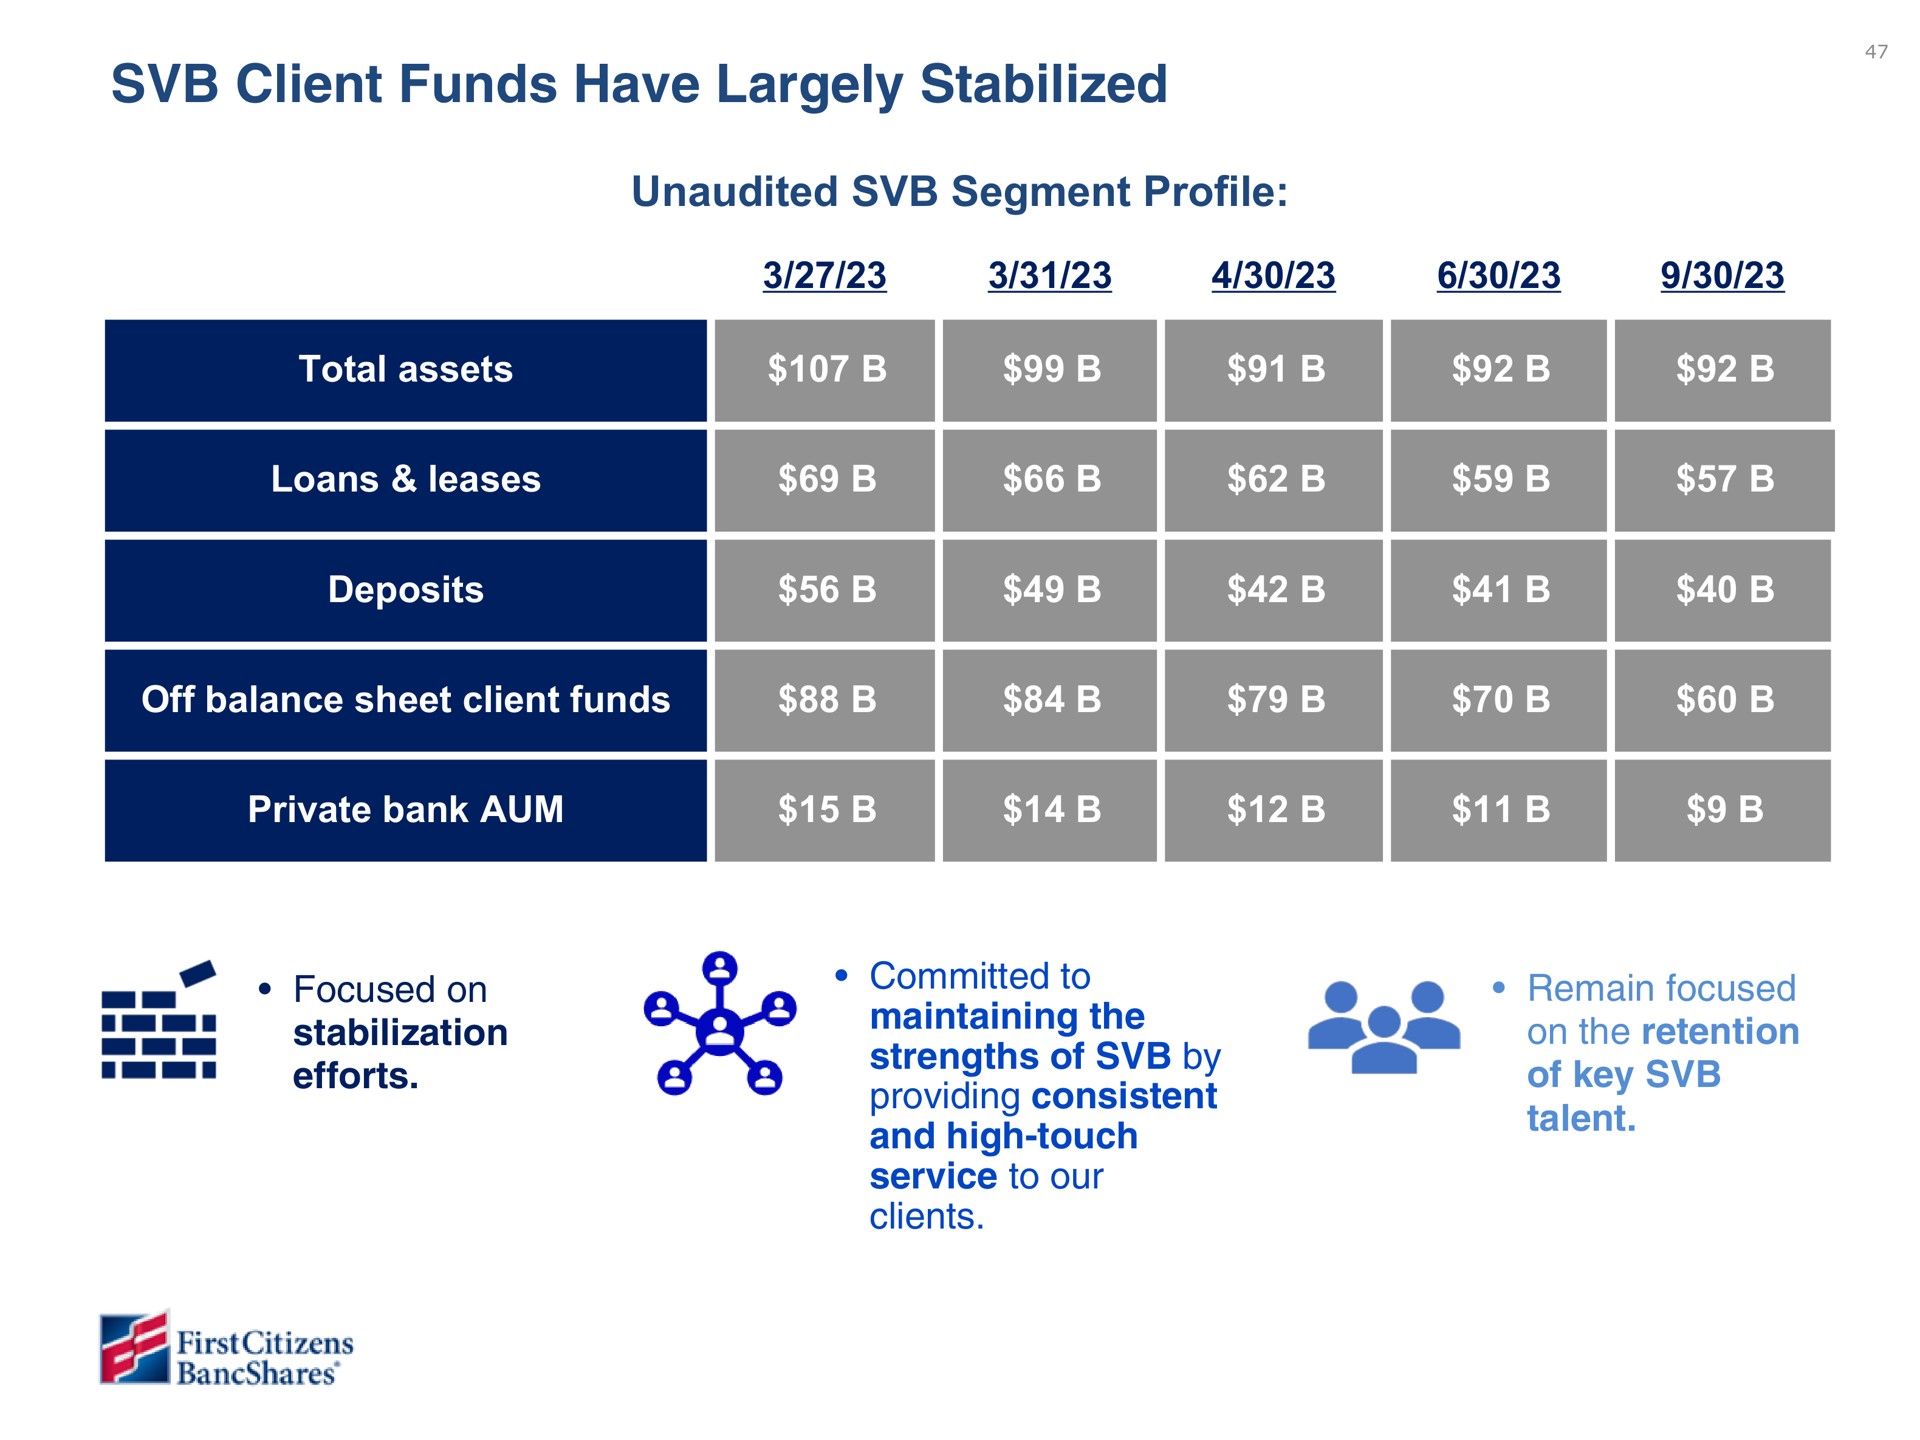 client funds have largely stabilized unaudited segment profile total assets loans leases deposits off balance sheet client funds private bank aum focused on stabilization efforts committed to maintaining the strengths of by providing consistent and high touch service to our clients remain focused on the retention of key talent a as | First Citizens BancShares